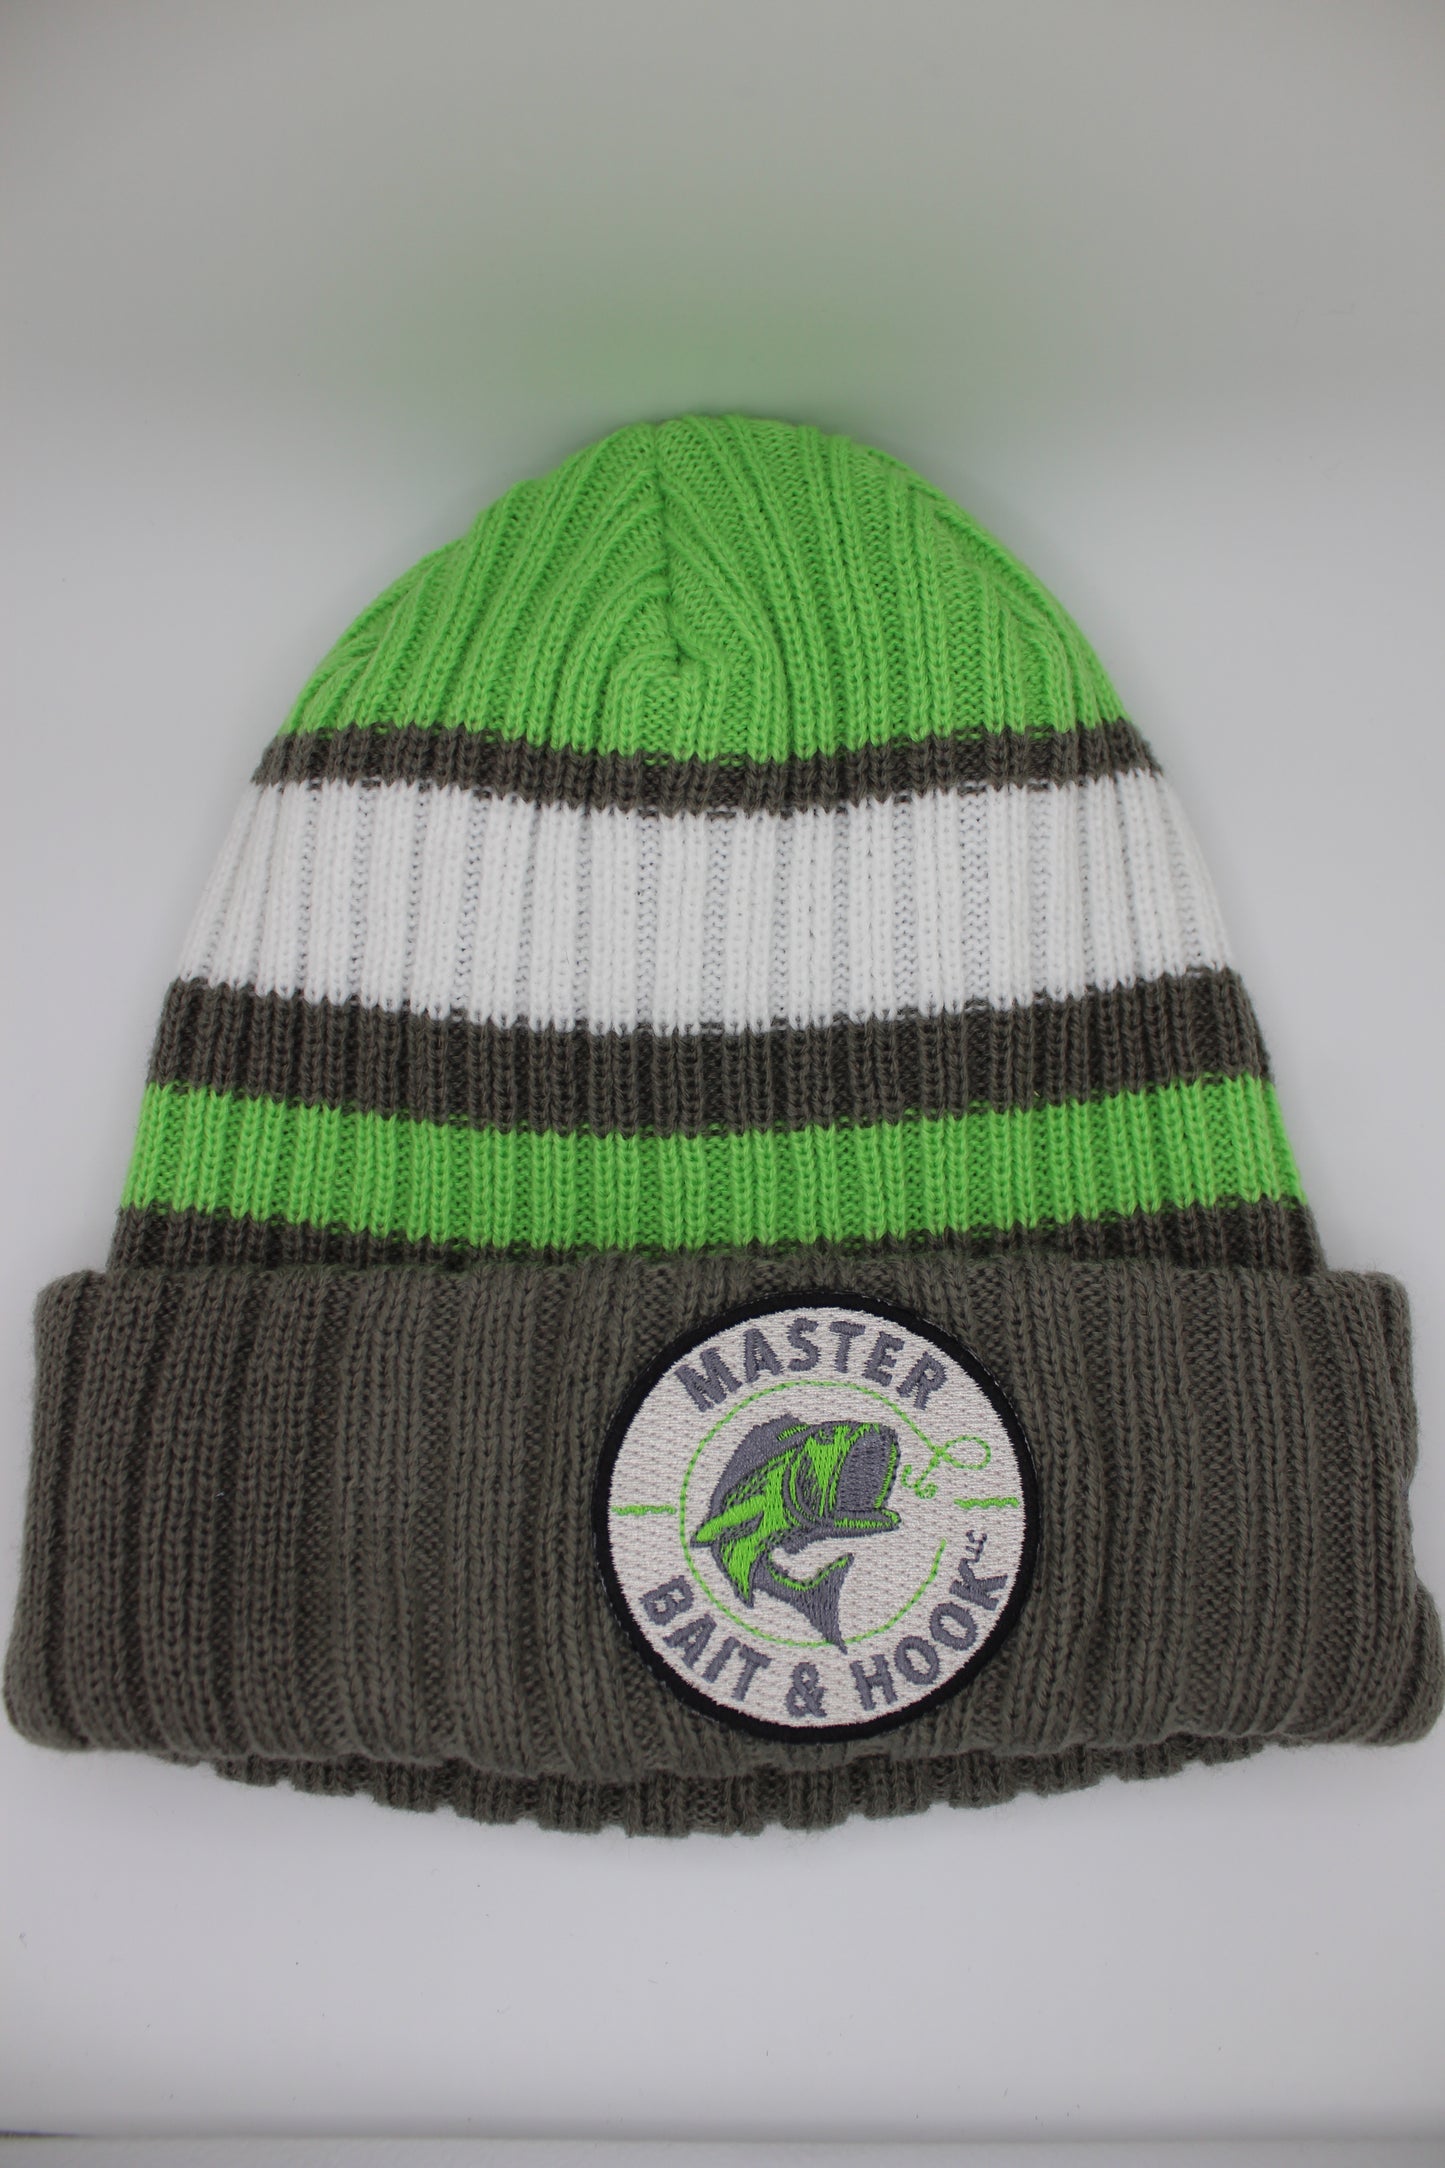 Master Bait and Hook Lime/Grey Knit Beanie